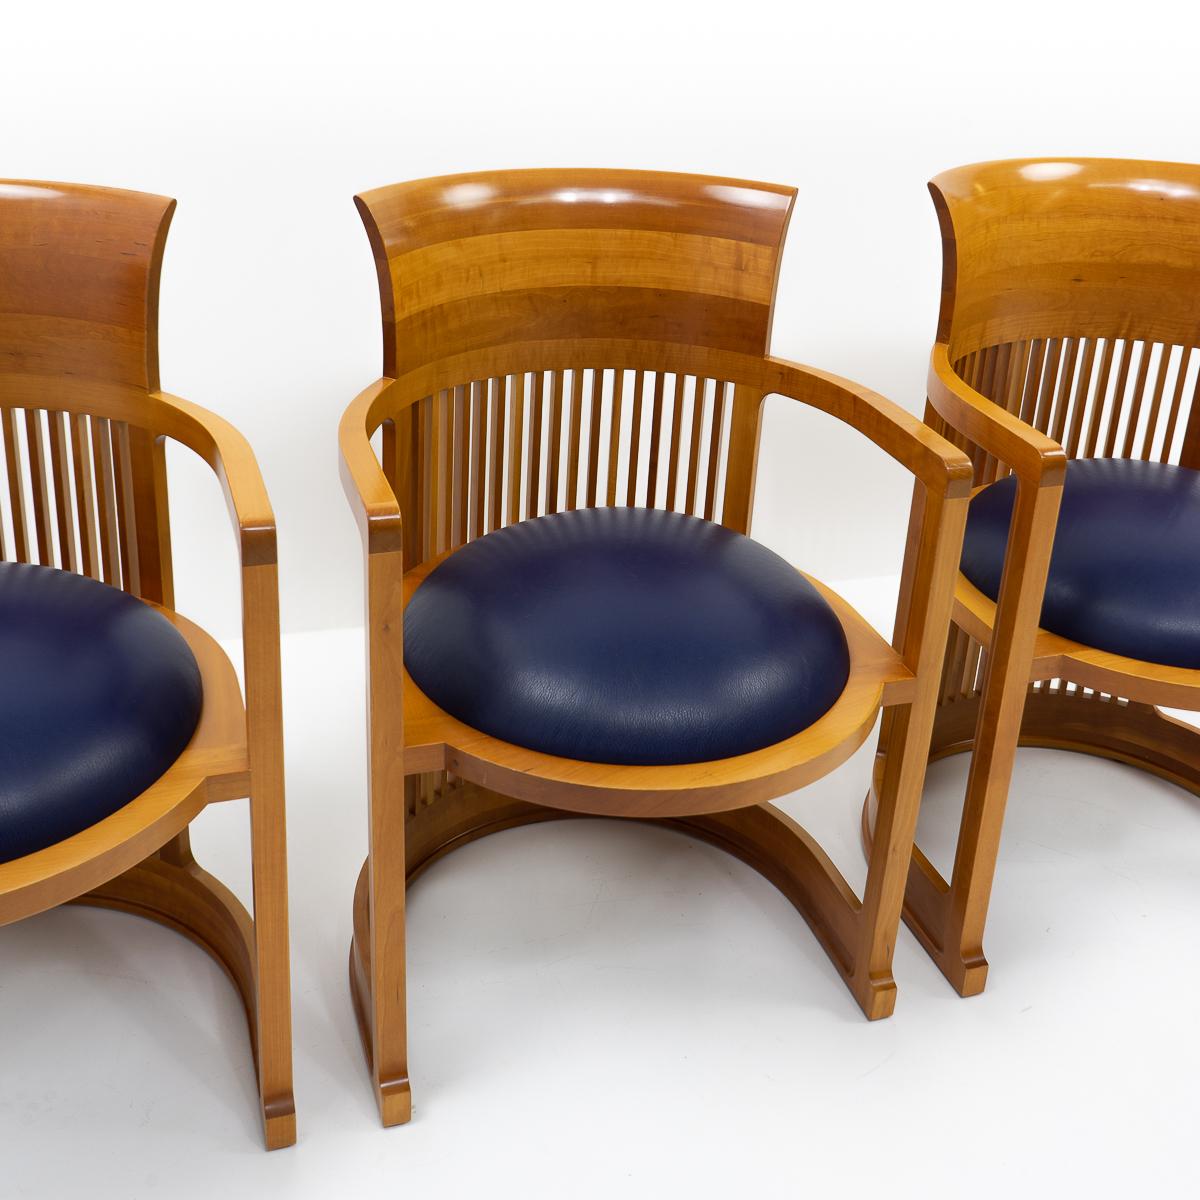 The iconic Barrel chair by Frank Lloyd Wright was based on one of his earlier conceptions from 1904 which he later adjusted to its current design. 

These sculptural chairs have been handmade in the Cassina workshops in Italy, and show exceptional